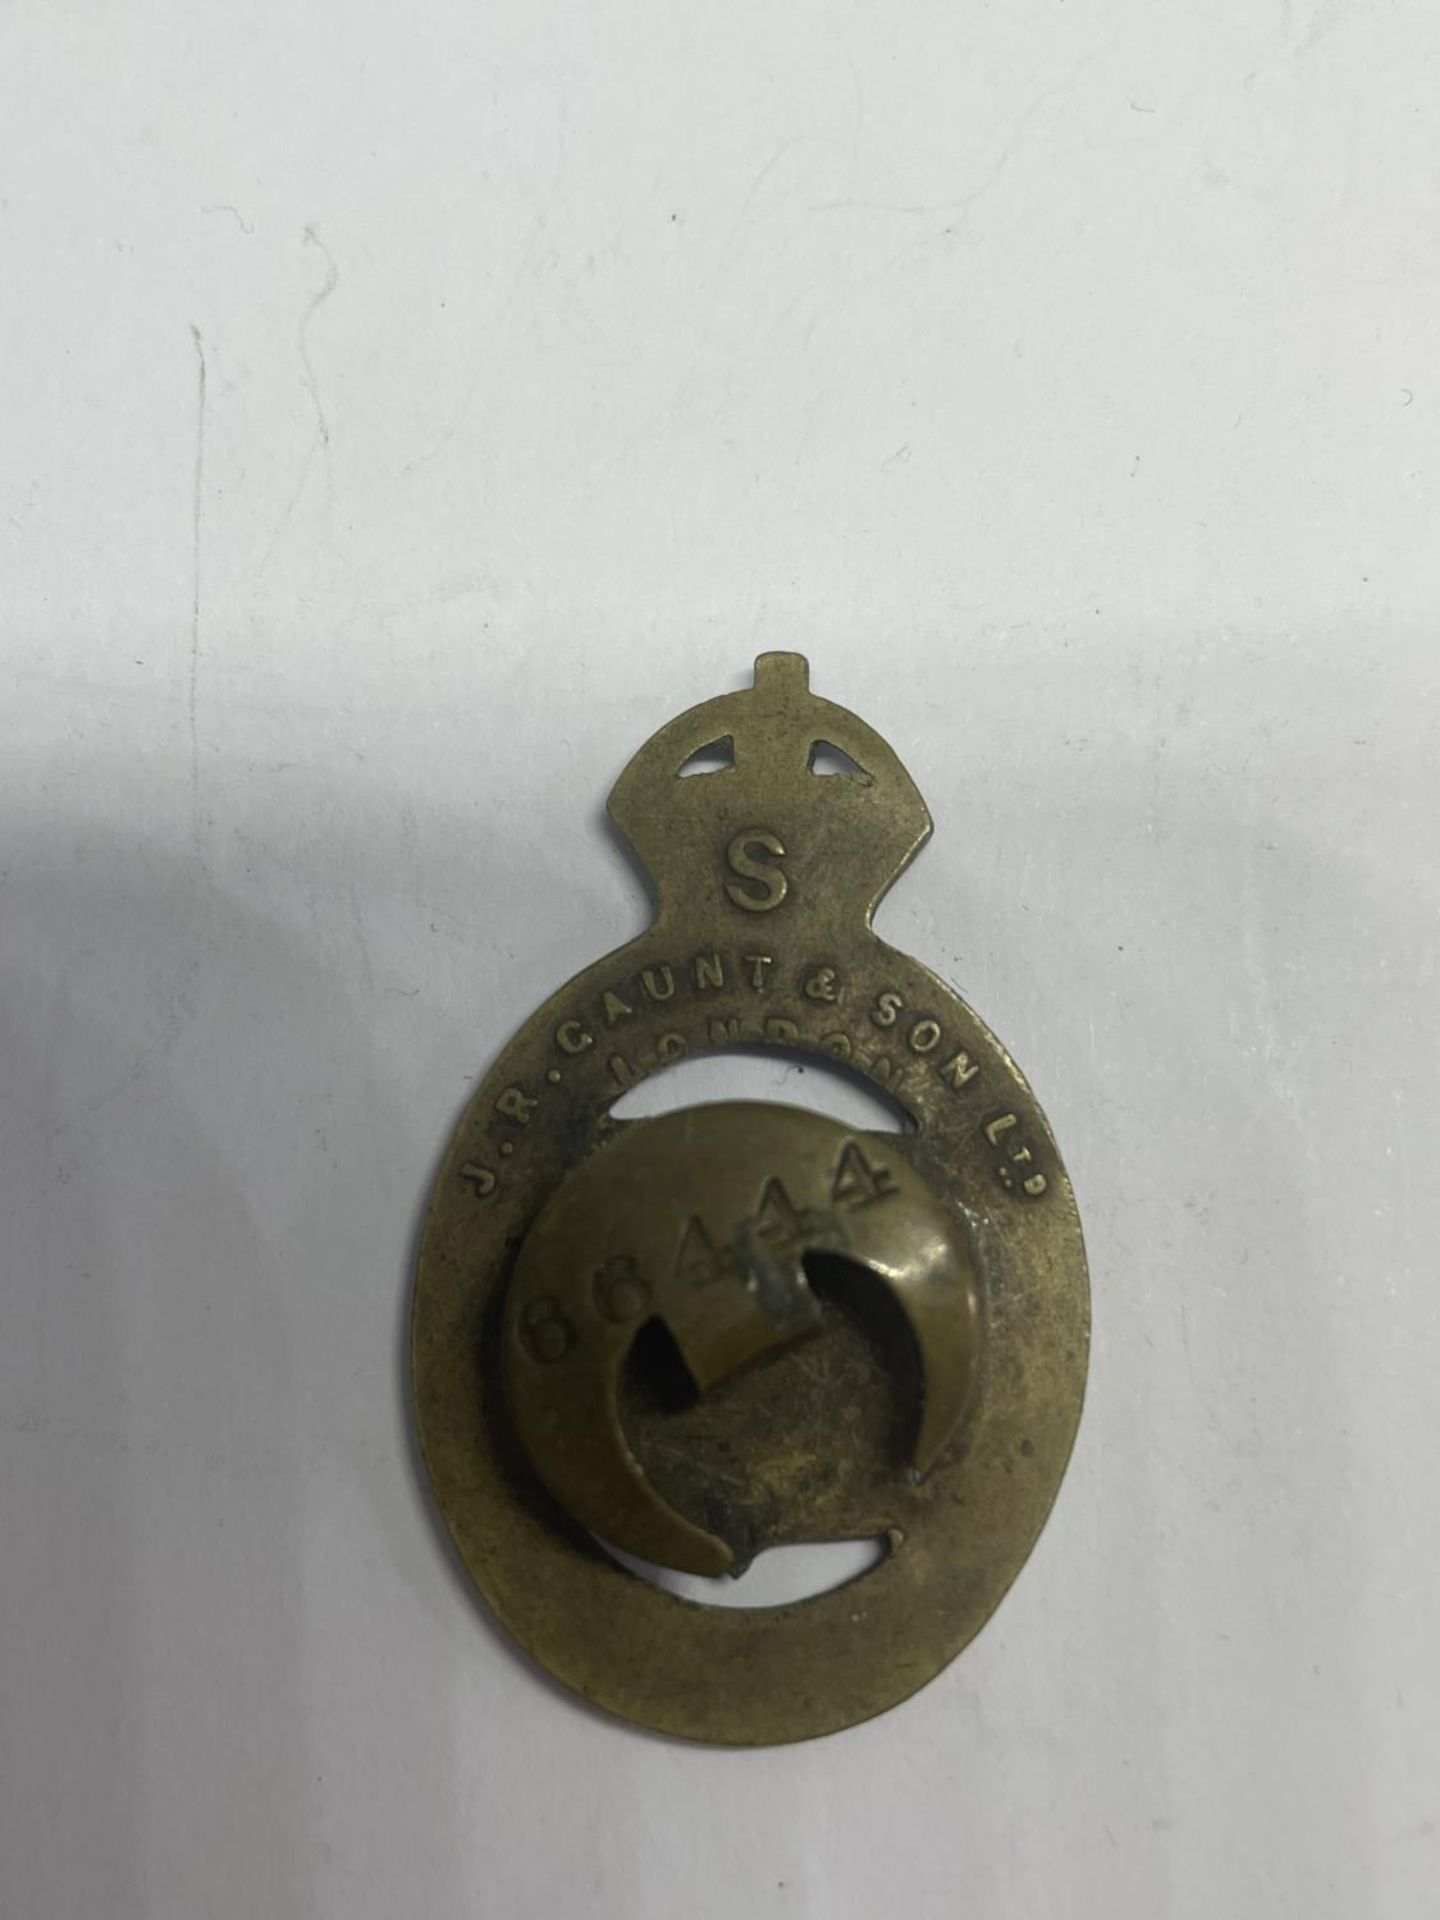 A 1915 ON WAR SERVICE BADGE NUMBERED 66444 - Image 2 of 2